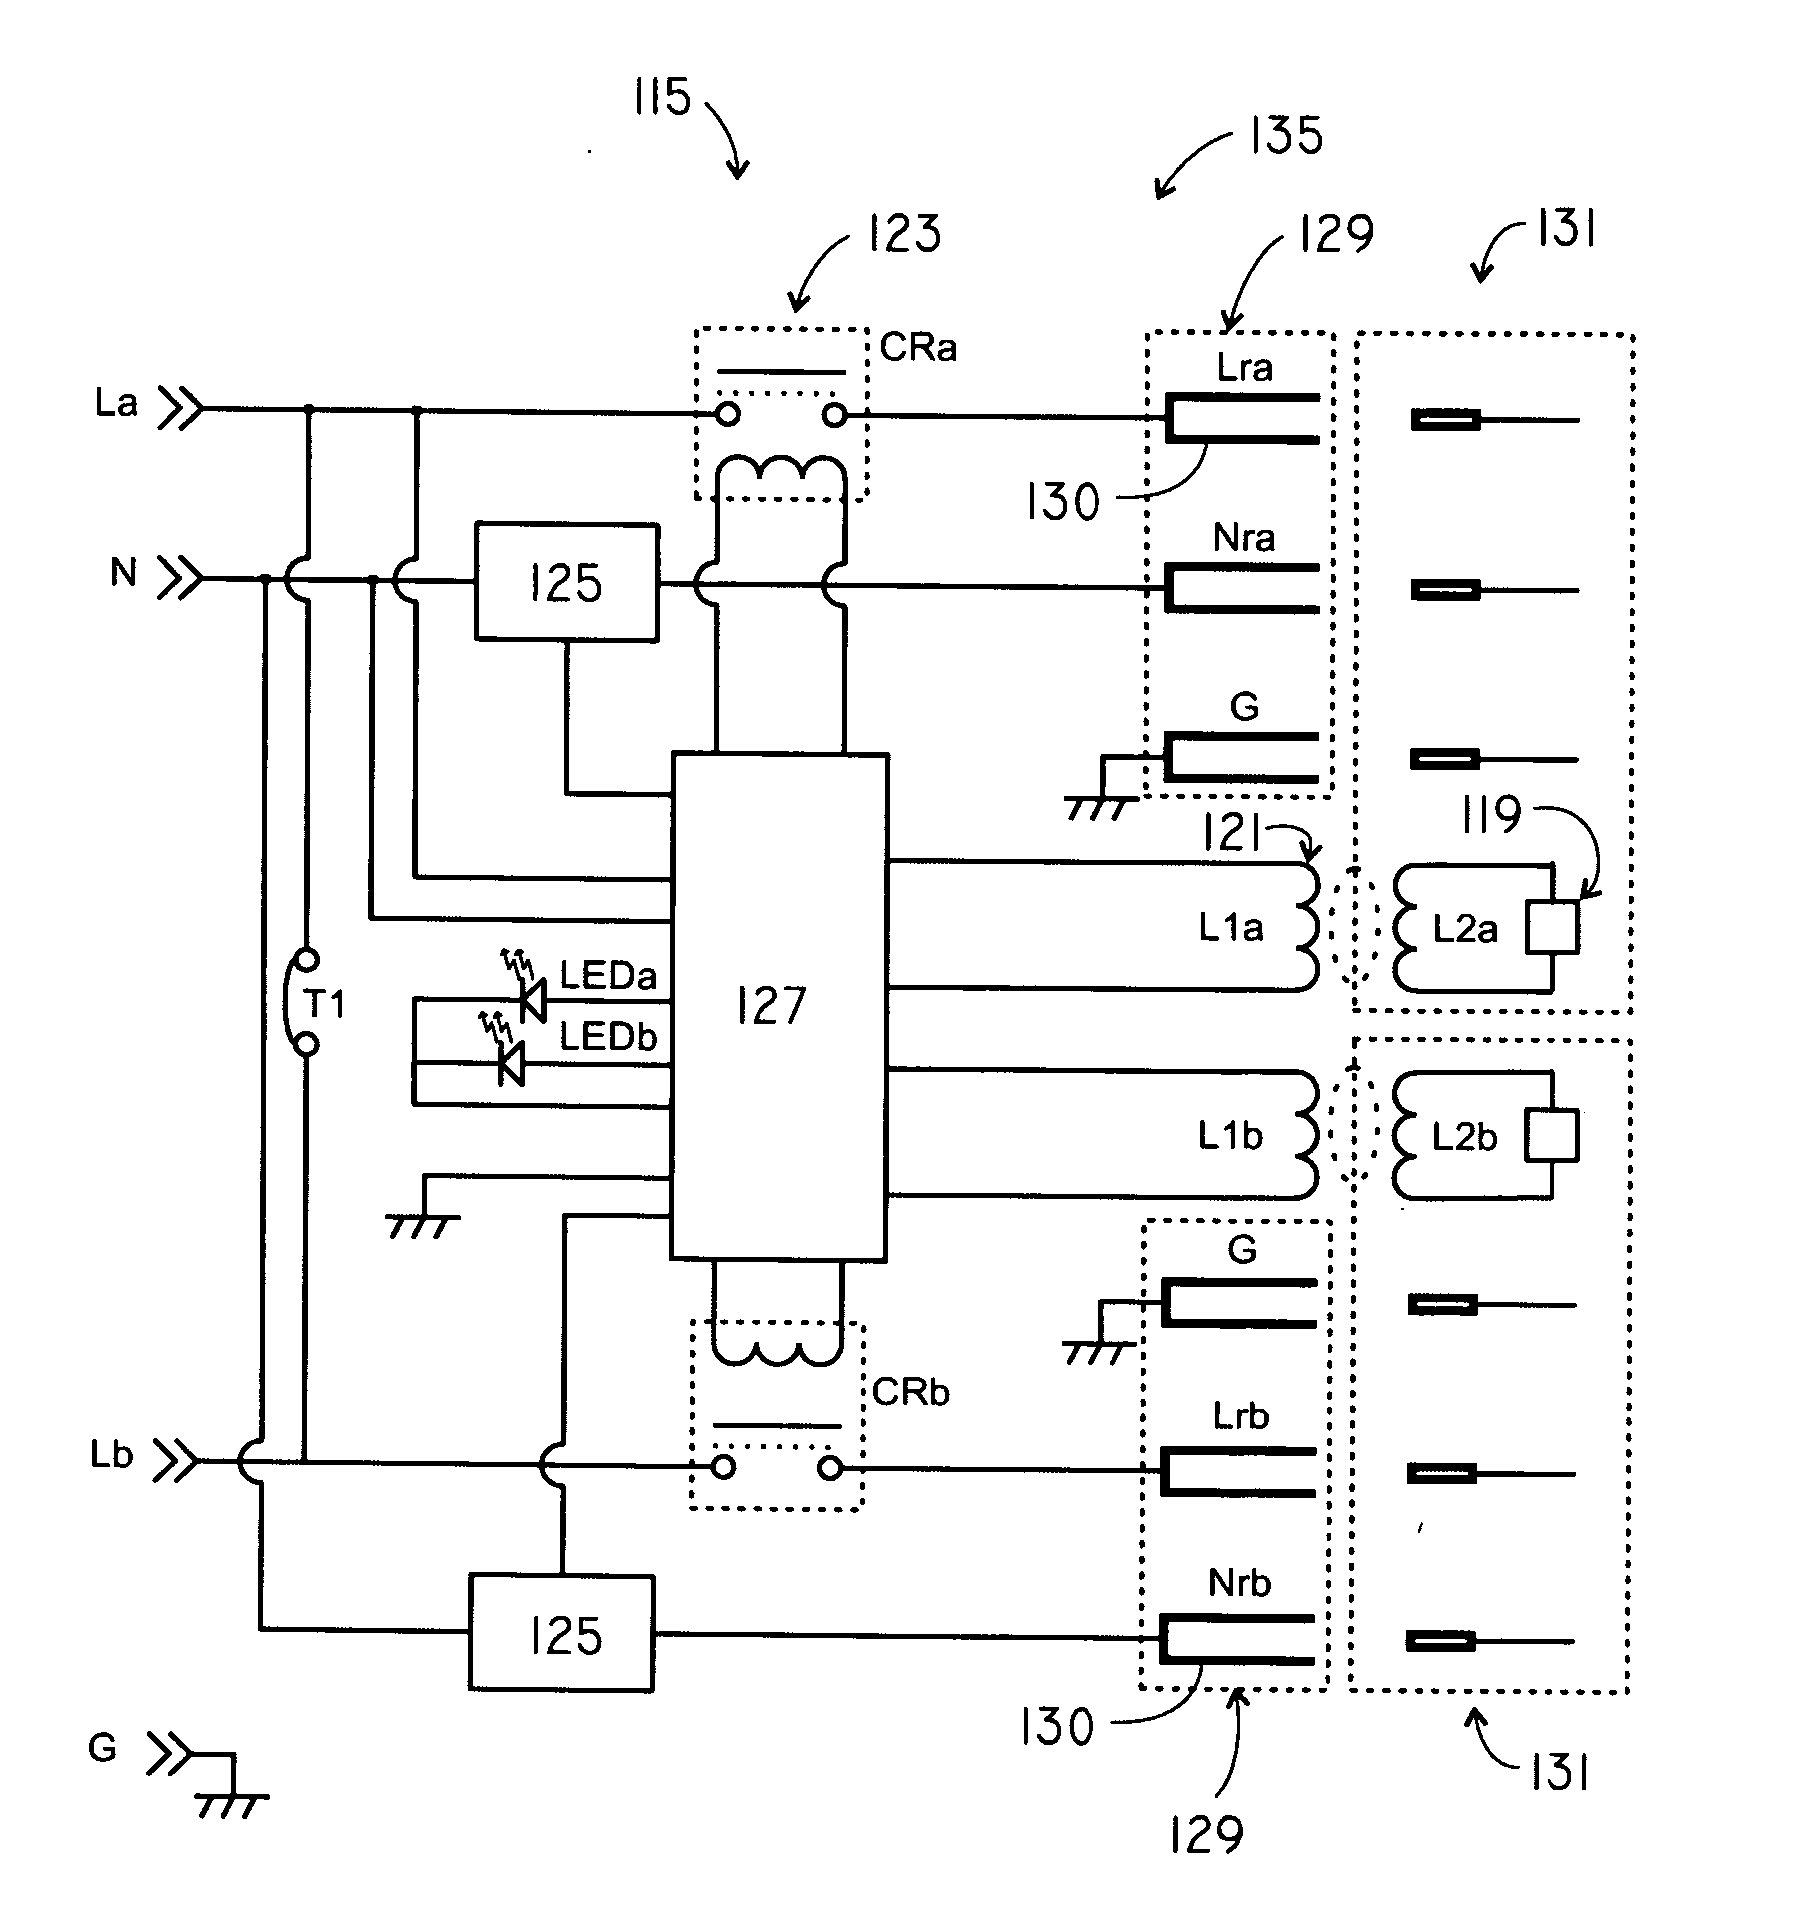 Electrical power distribution system